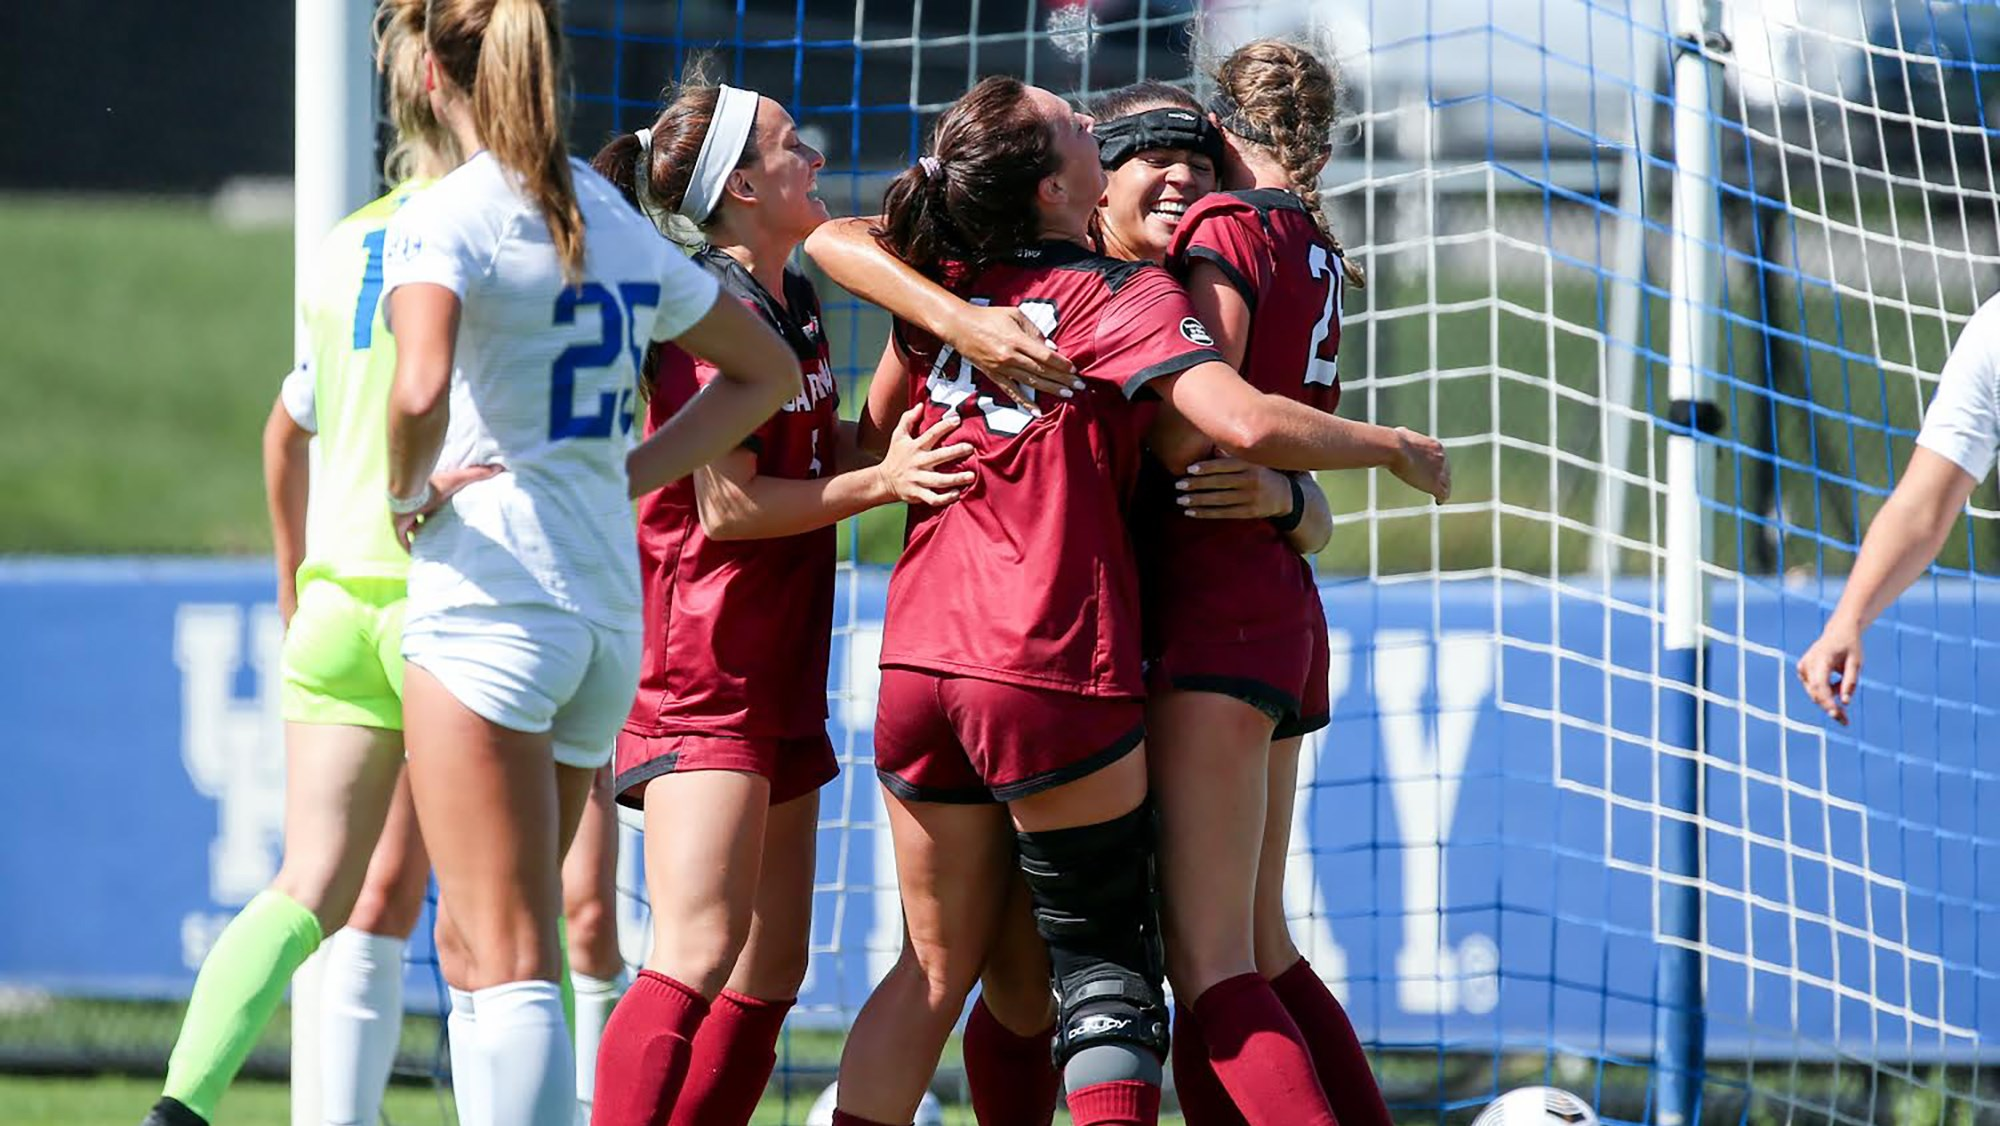 Gamecocks Remain Undefeated in SEC Play with 2-1 Victory Over Kentucky